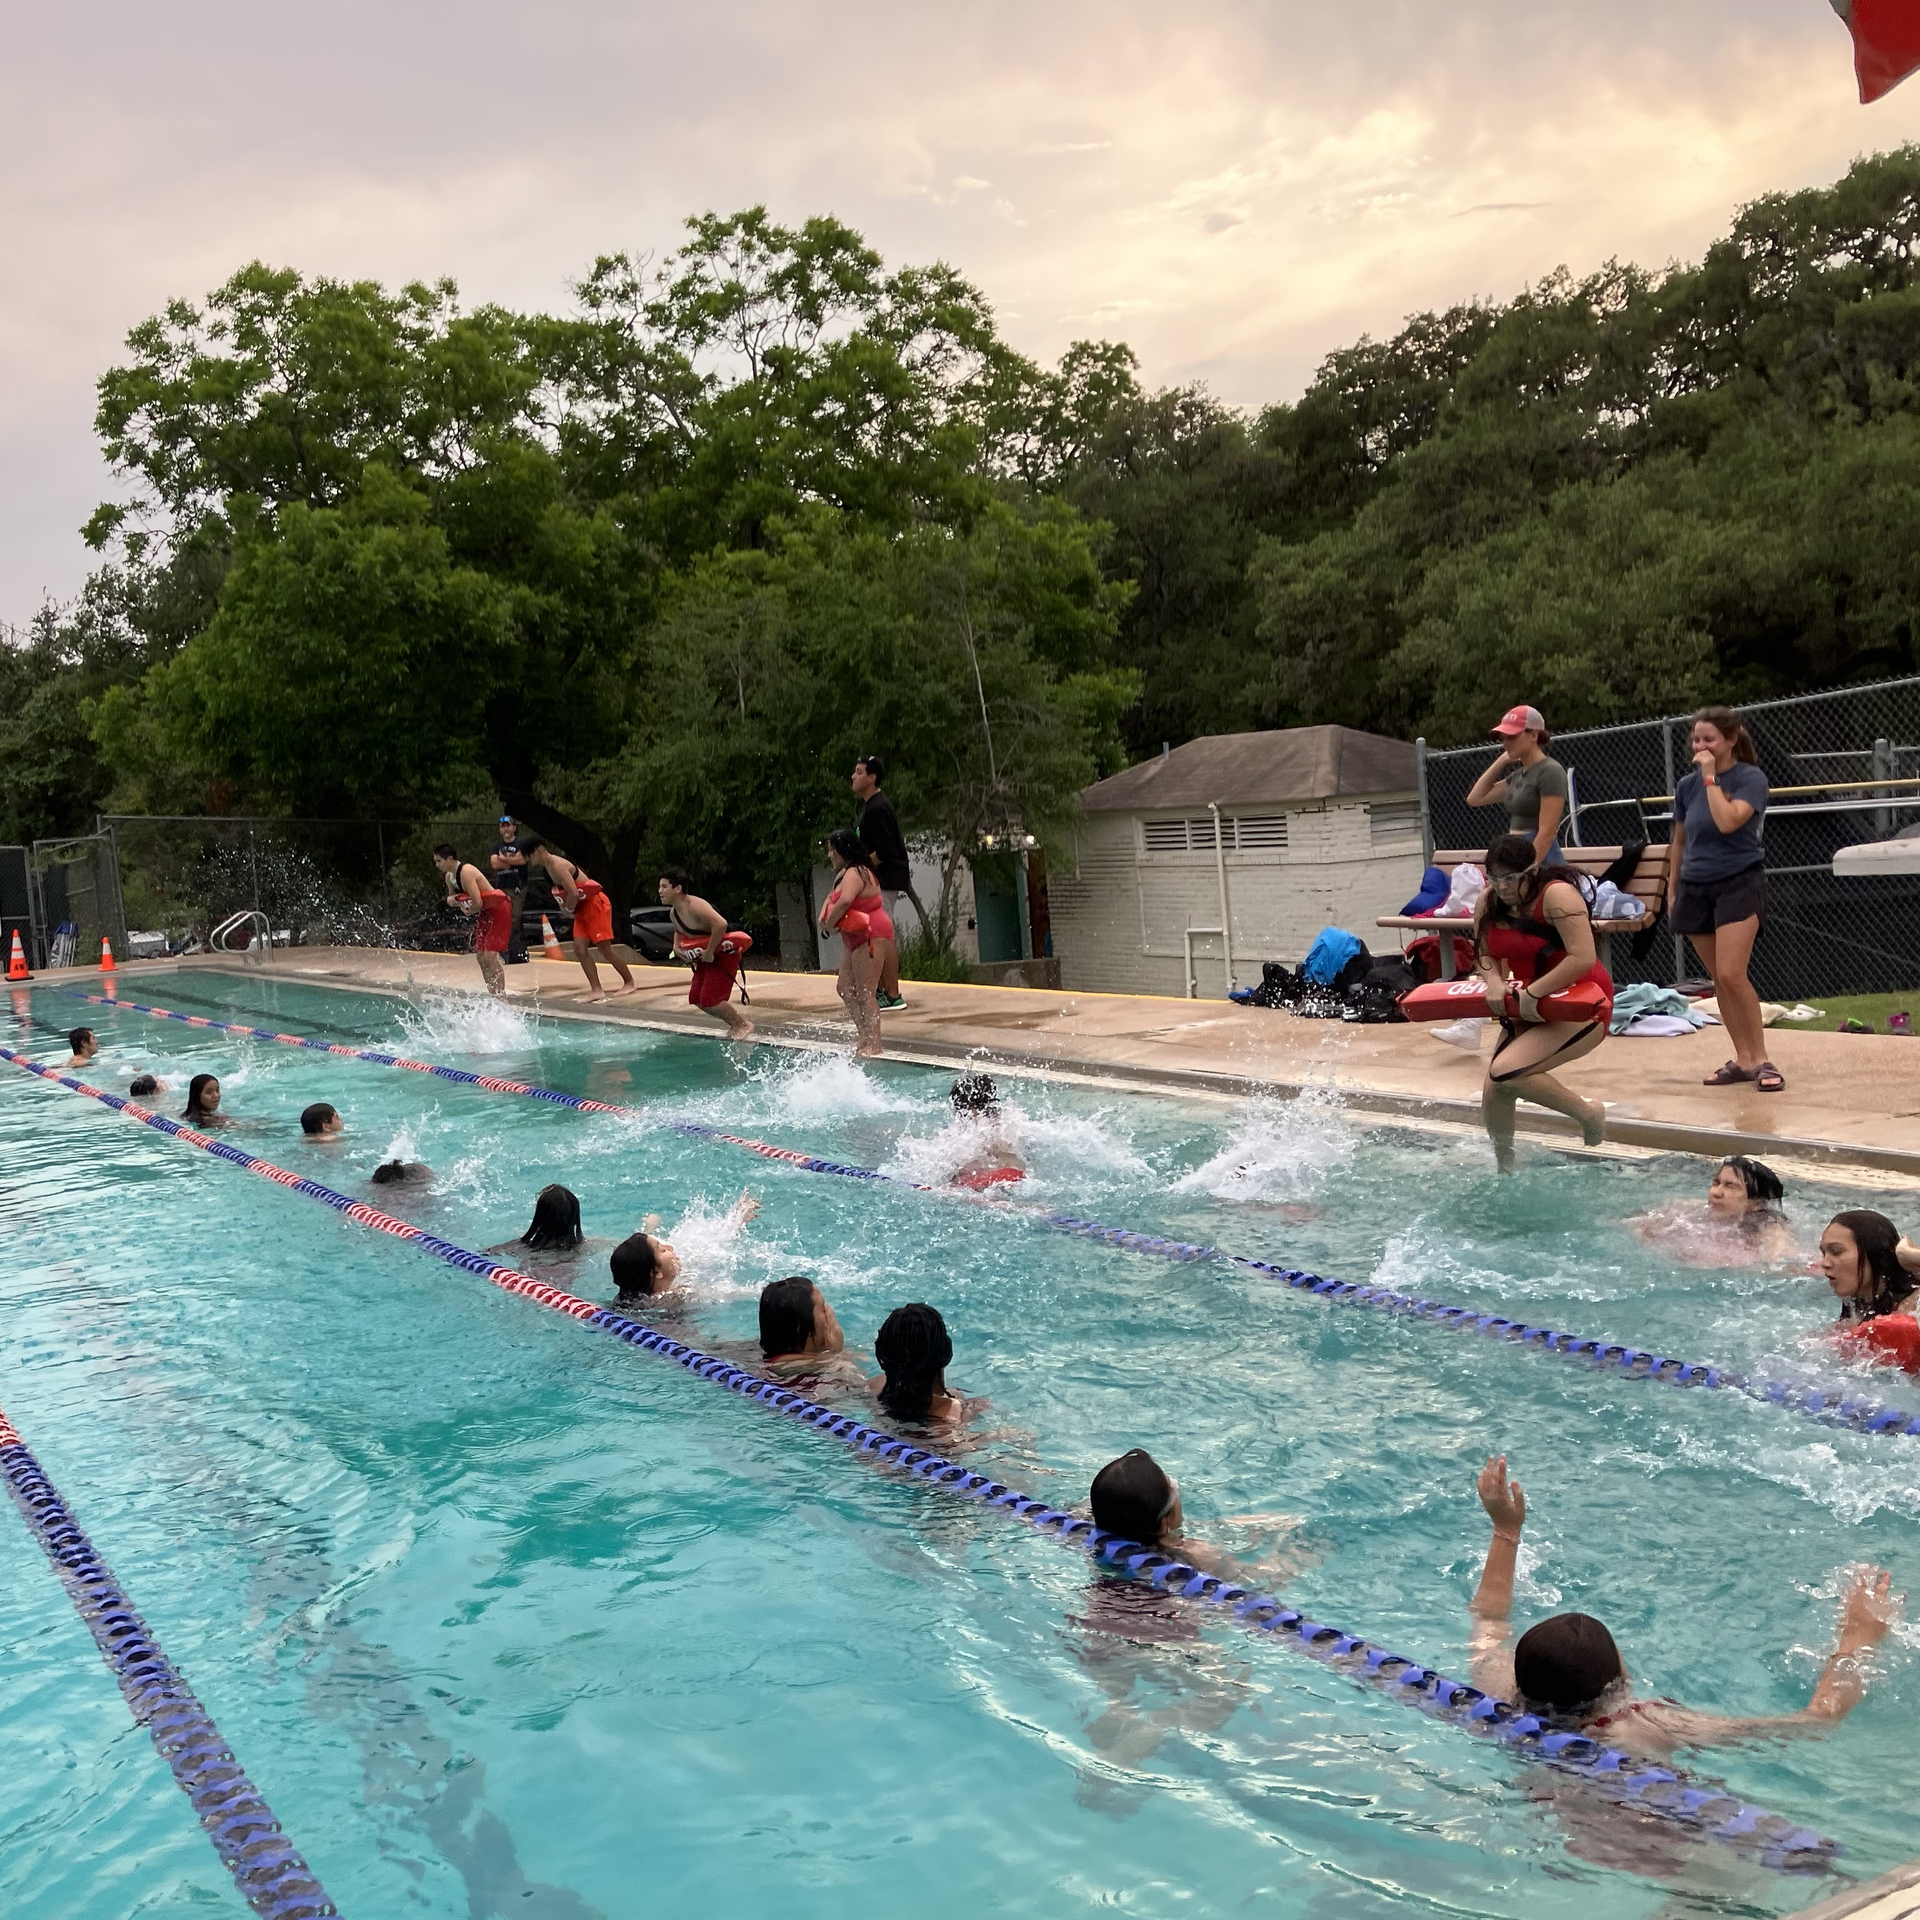 Lifeguard trainees jump into water to practice rescues during a lifeguard class at a pool in Austin. 